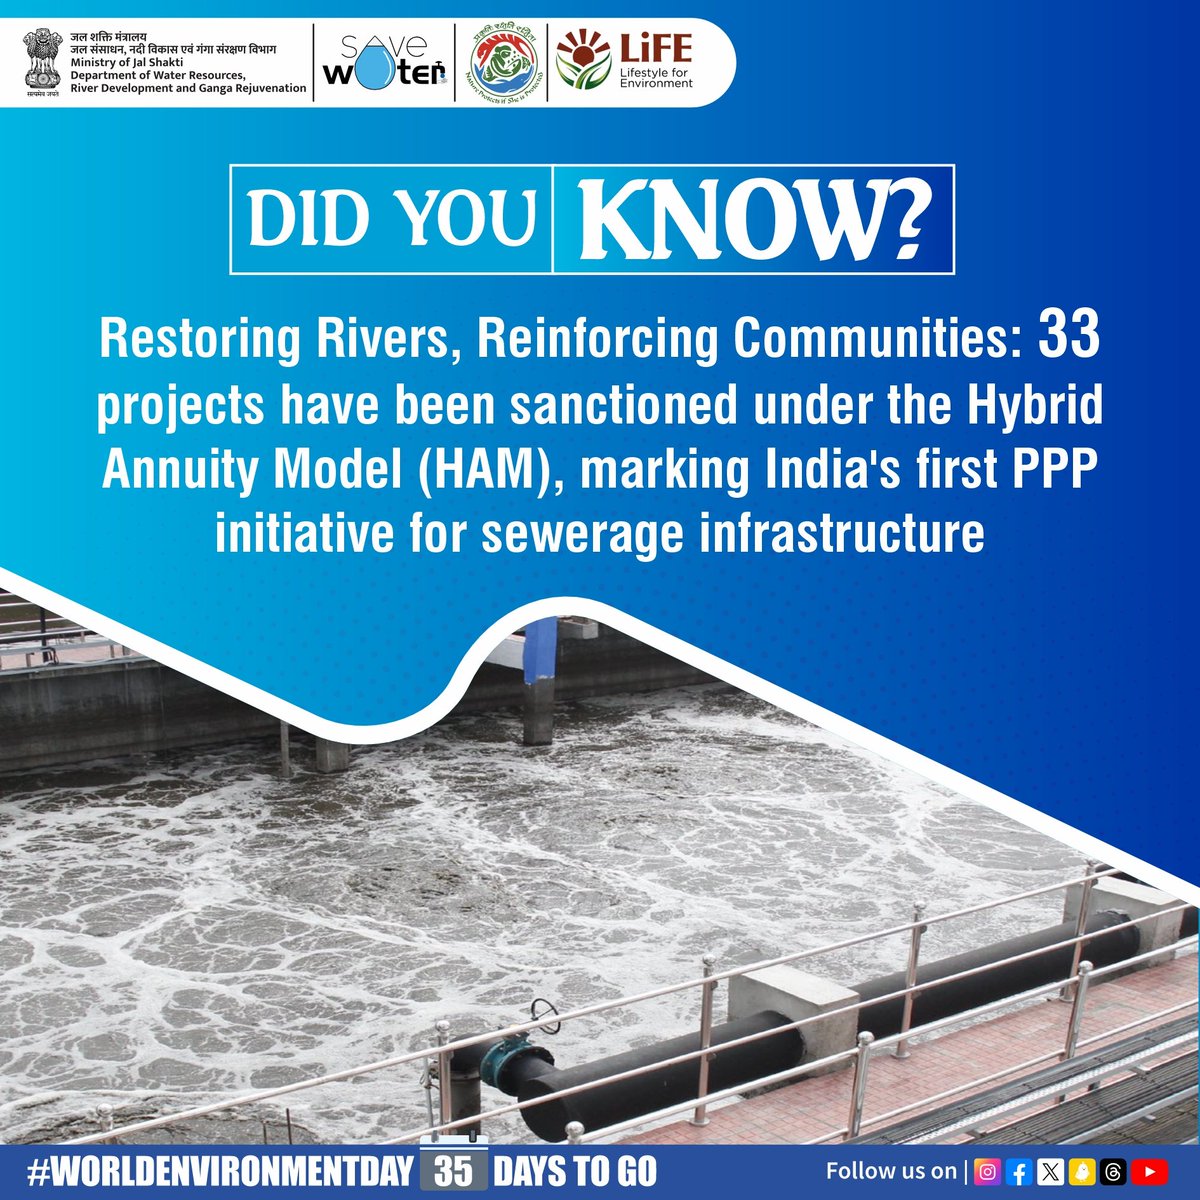 Cleaner Ganga, healthier communities! #NamamiGange is building critical sewage treatment plants to reduce pollution & protect the river. This means cleaner water & a healthier environment for communities along the Ganga! #CleanWater #HealthyLiving #DidYouKnow